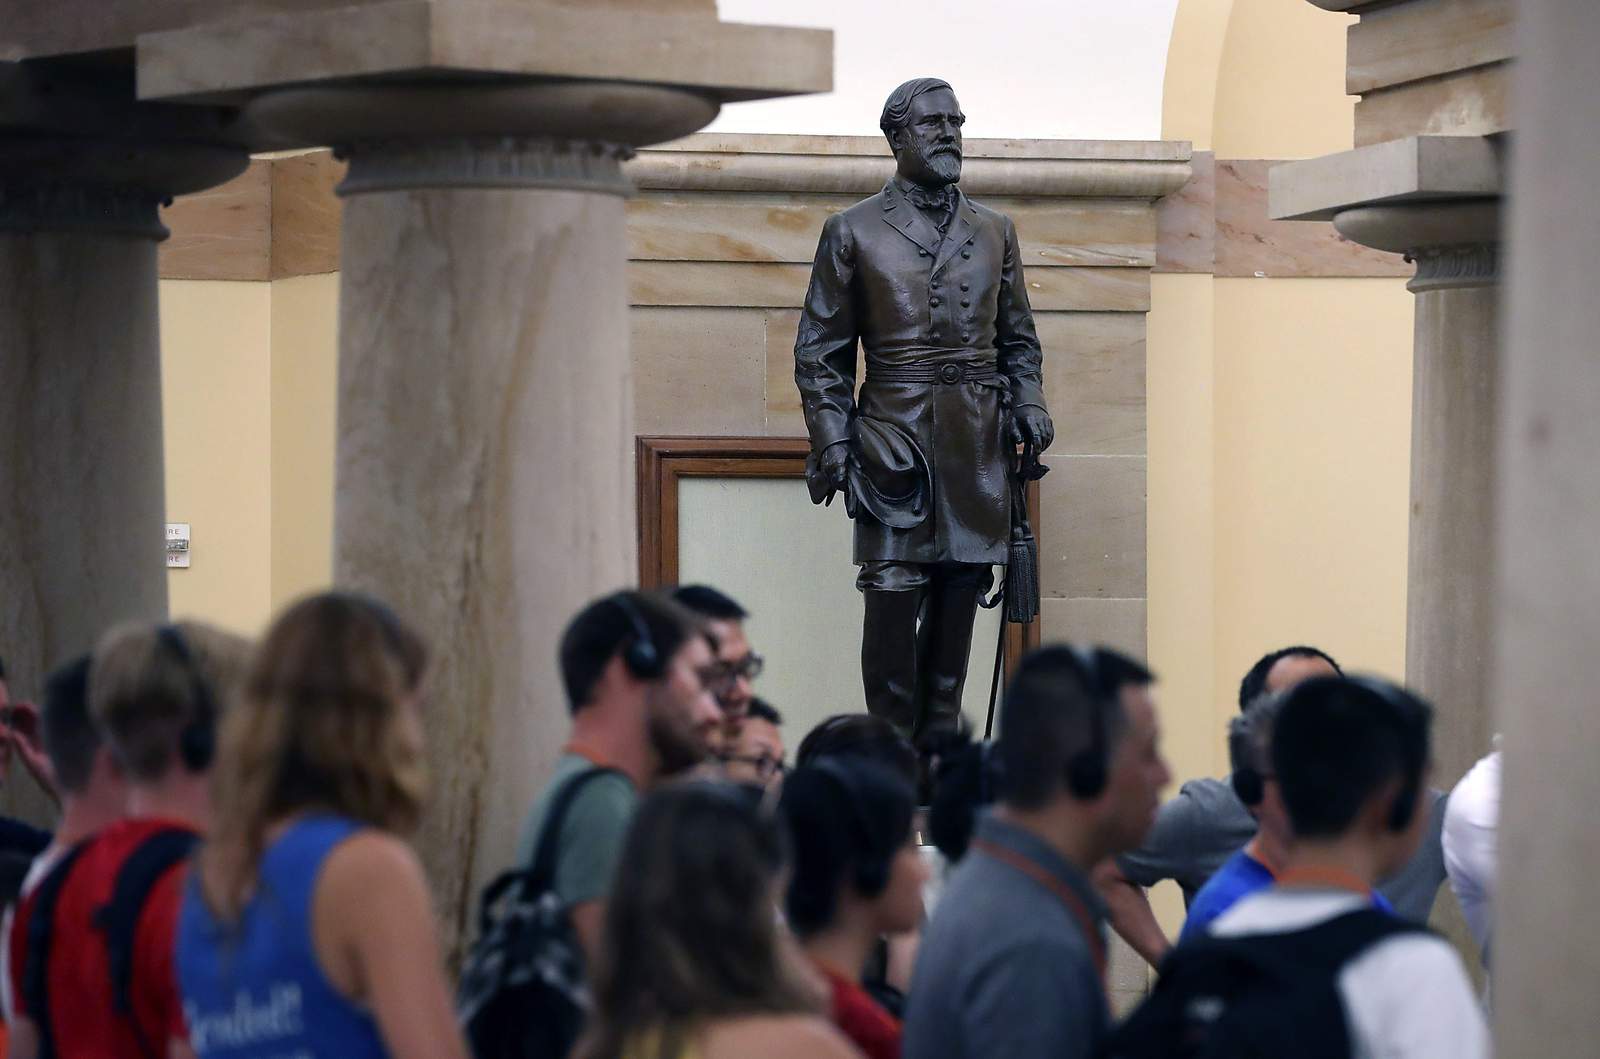 Virginia’s Lee statue has been removed from US Capitol